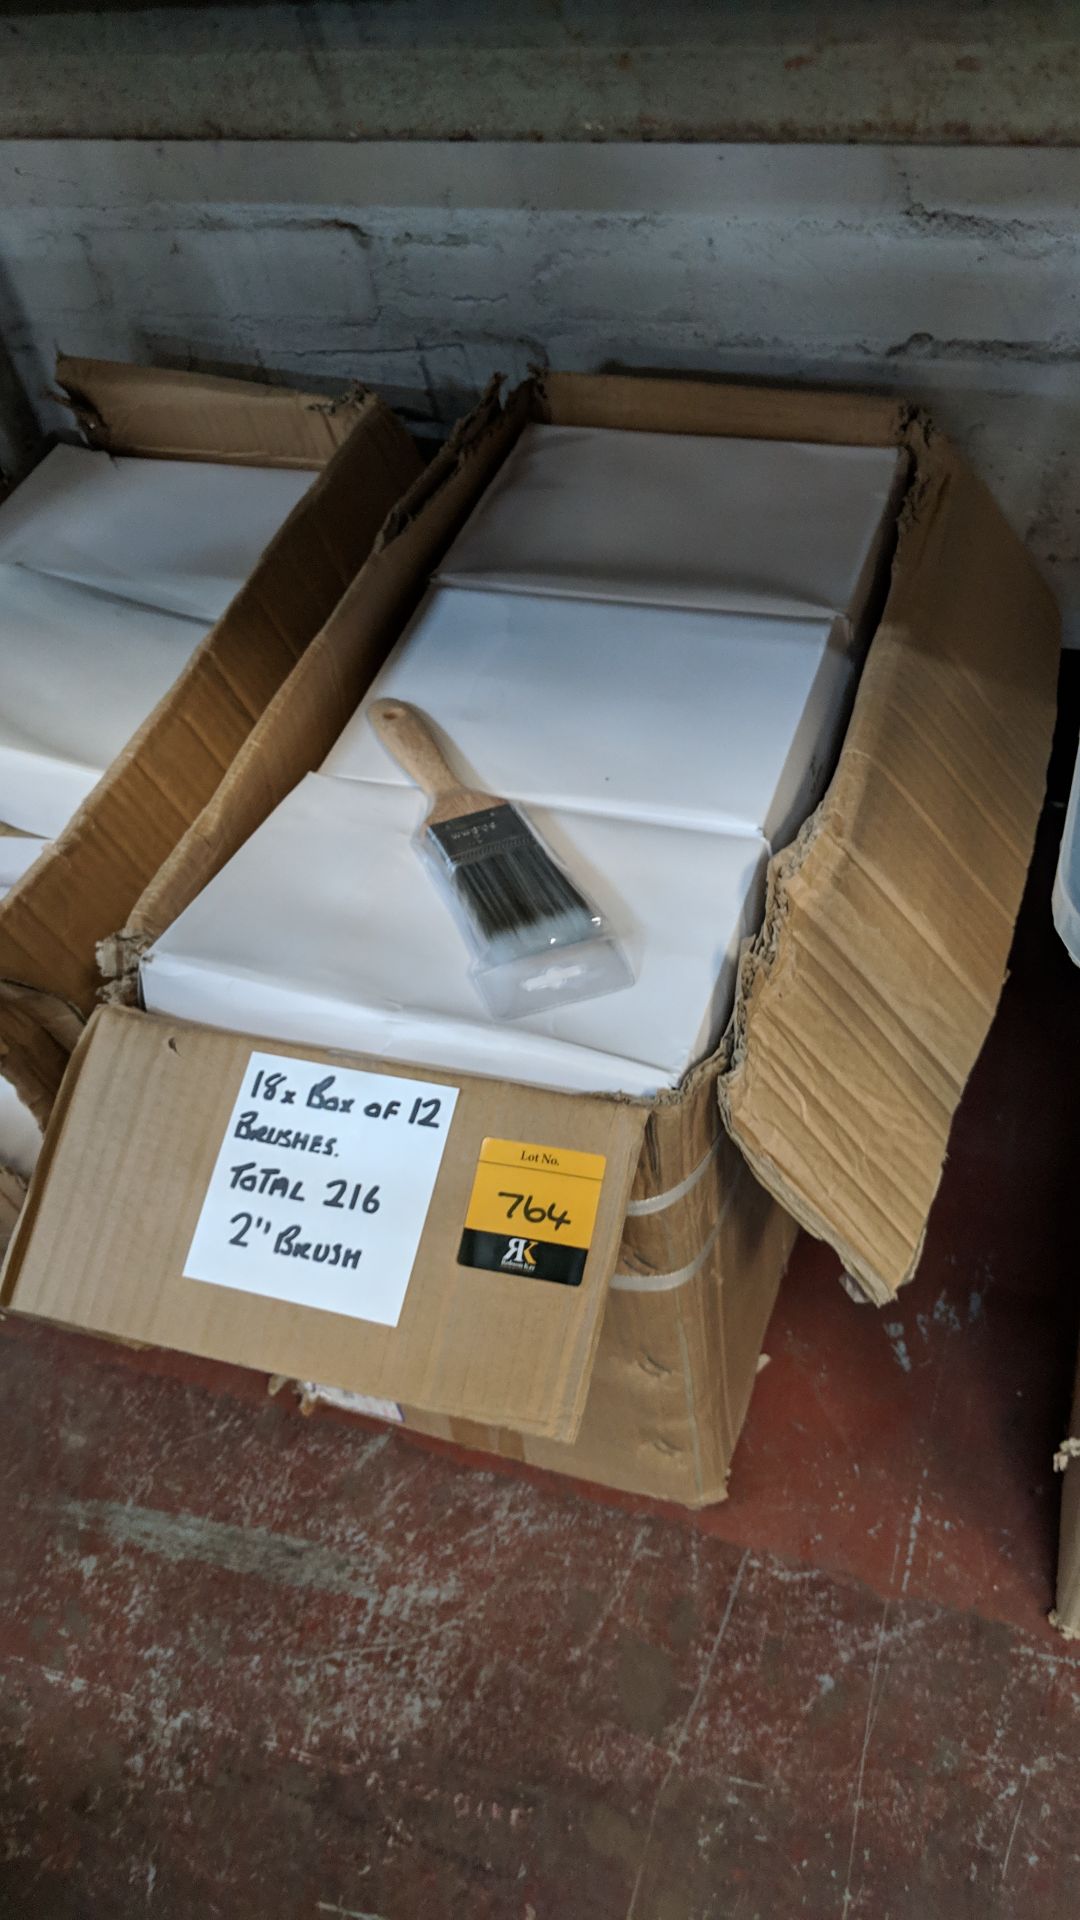 216 off 2" wide flat paintbrushes This lot is one of a number of lots in this sale which